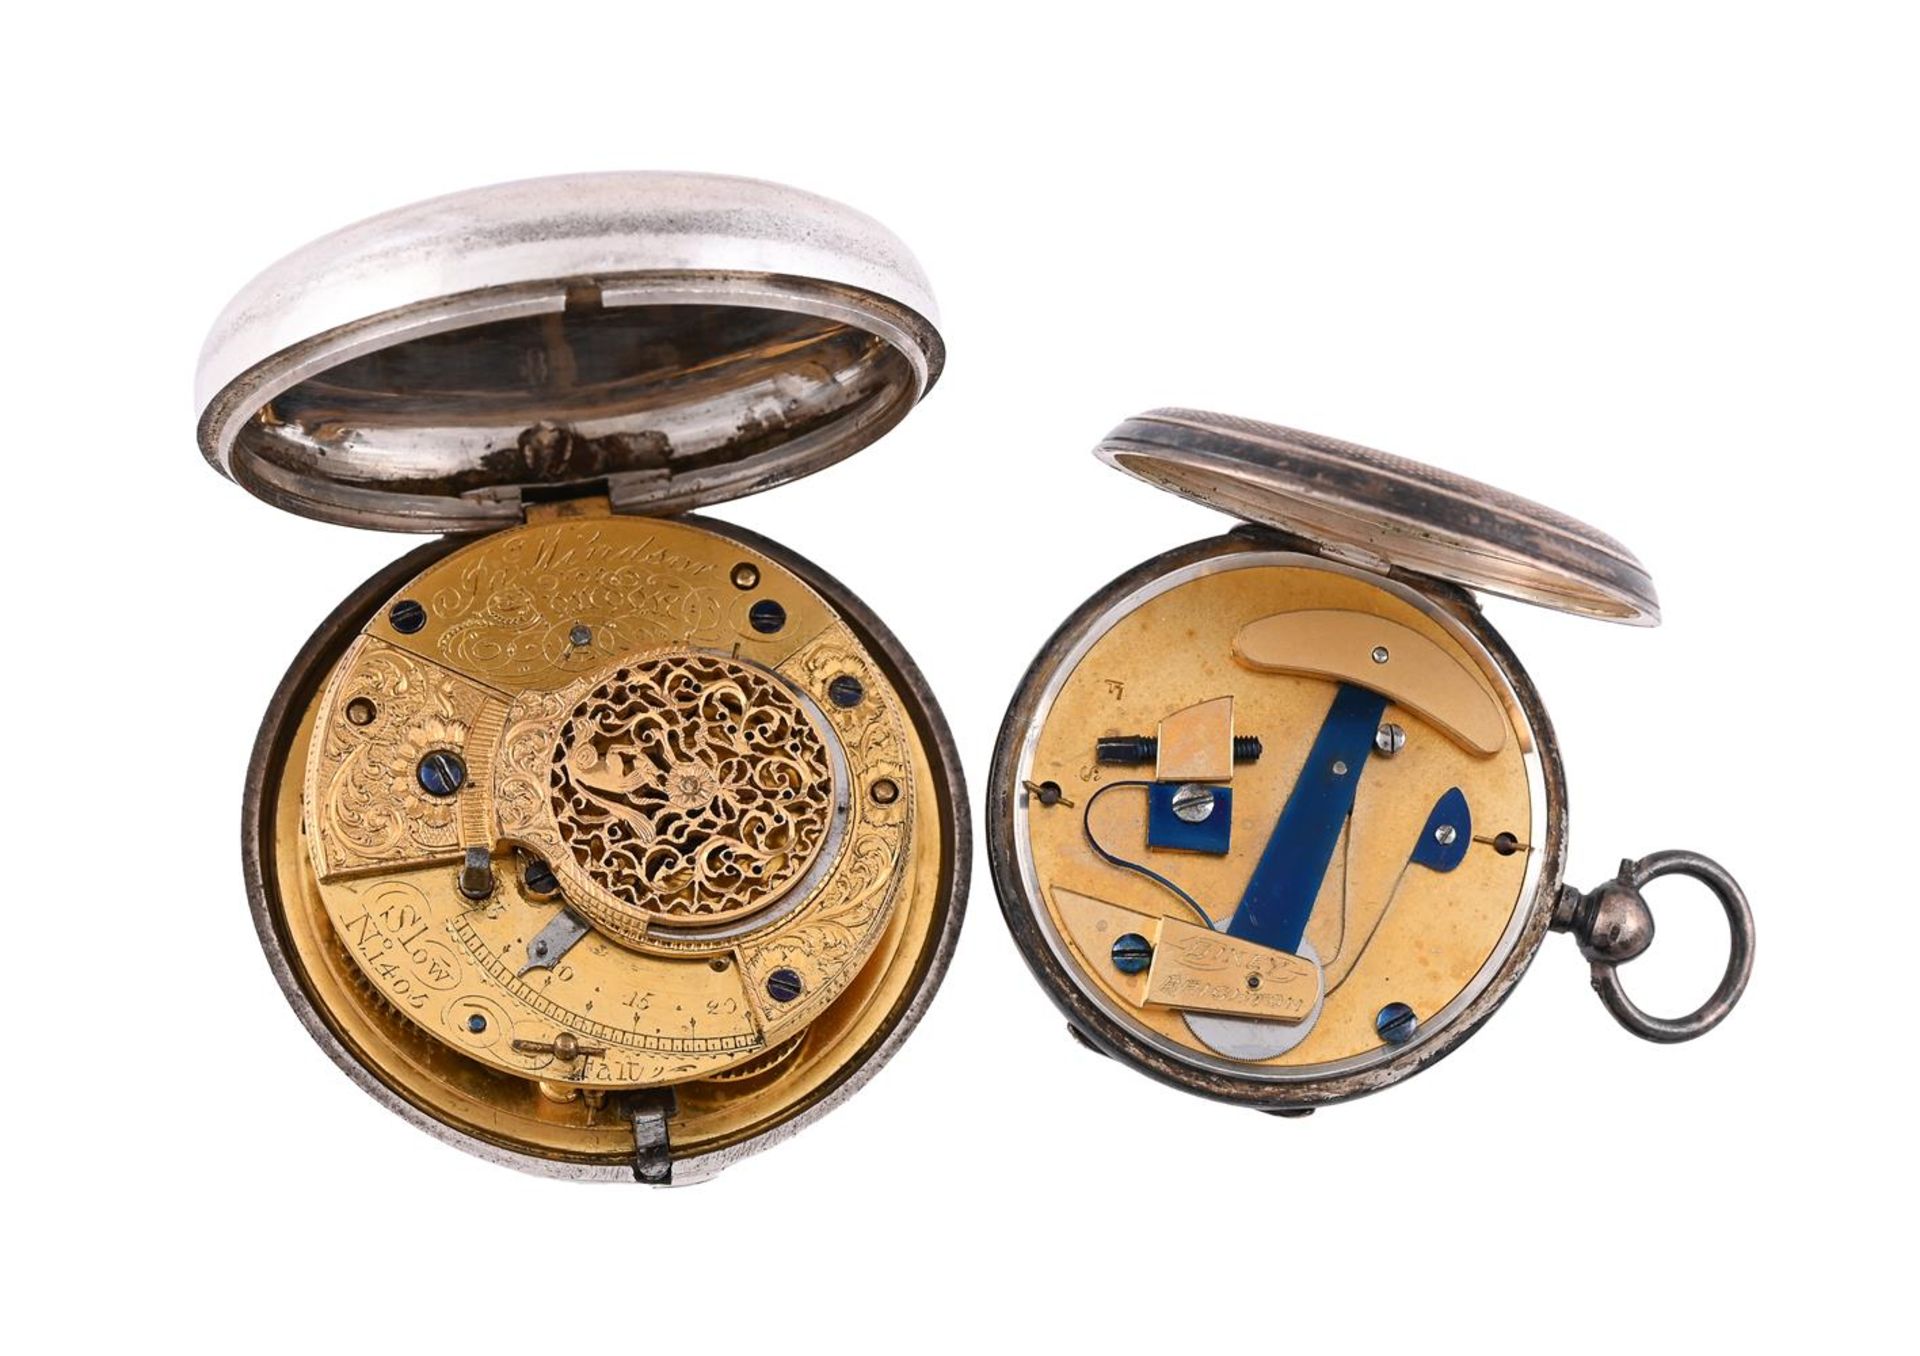 AN REGENCY SILVER PAIR-CASED VERGE POCKET WATCH WITH DIAL UNUSUALLY INSCRIBED FOR THE ORIGINAL OWNER - Image 2 of 2